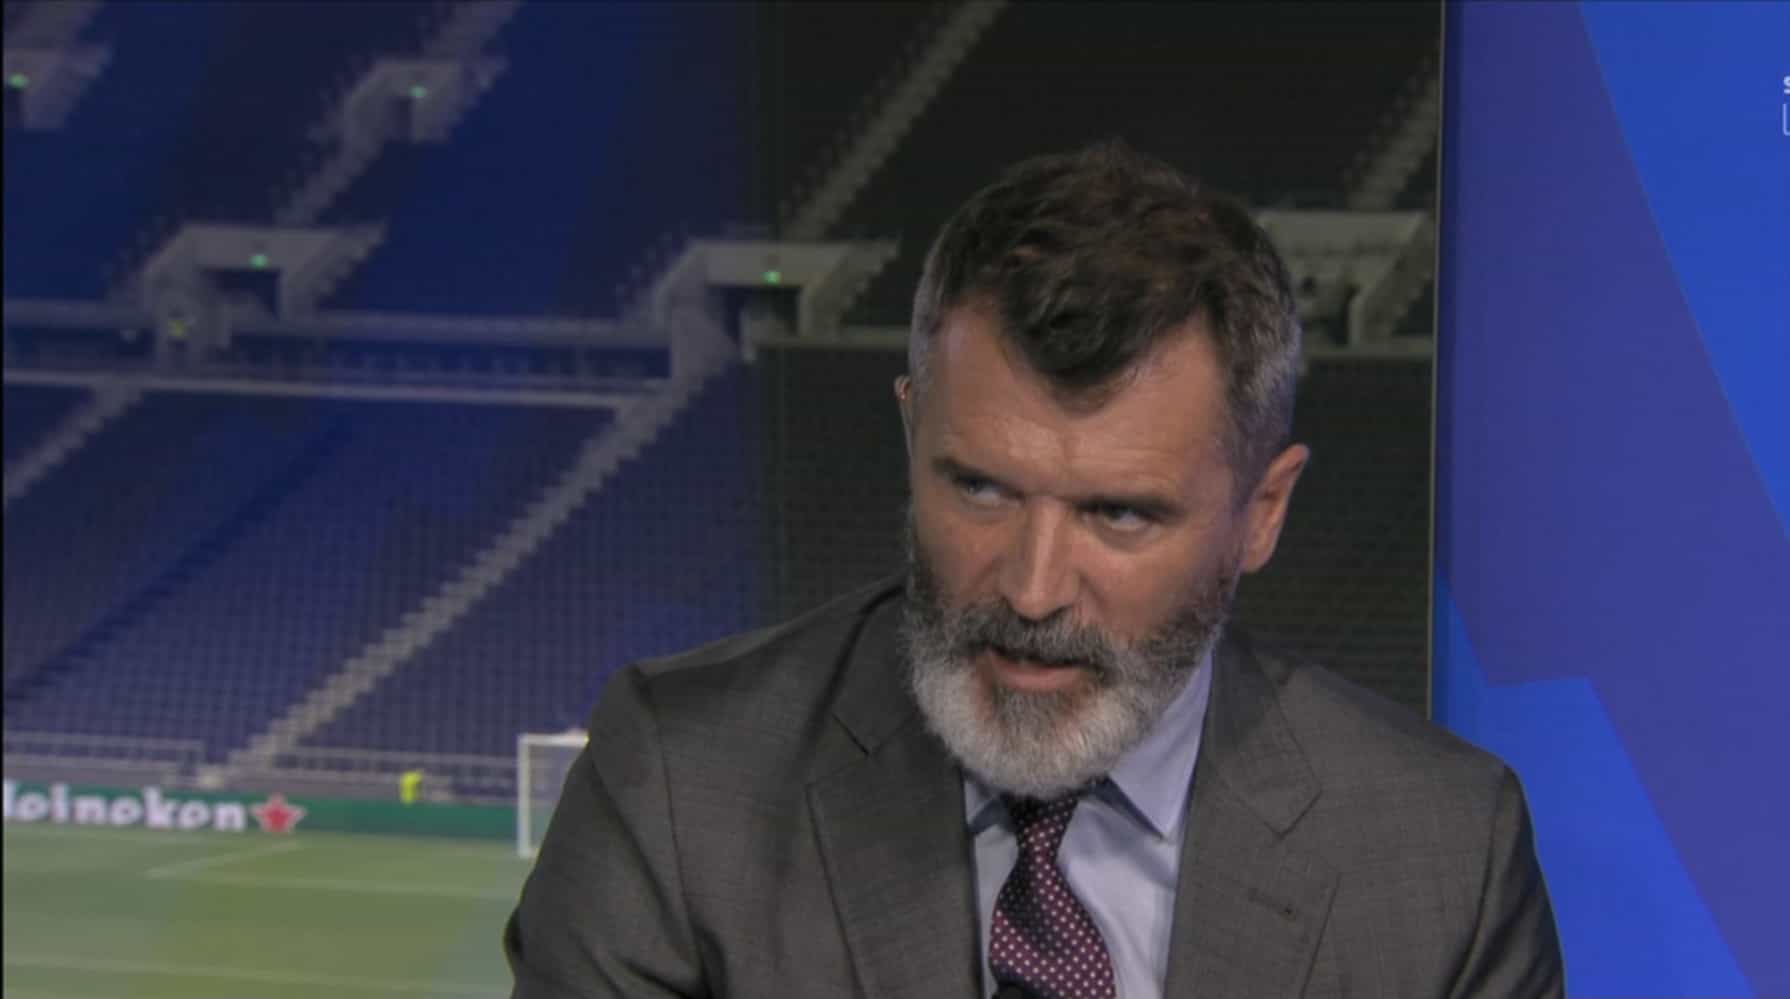 We can’t wait for Simon Jordan vs Roy Keane in 2022 after these comments